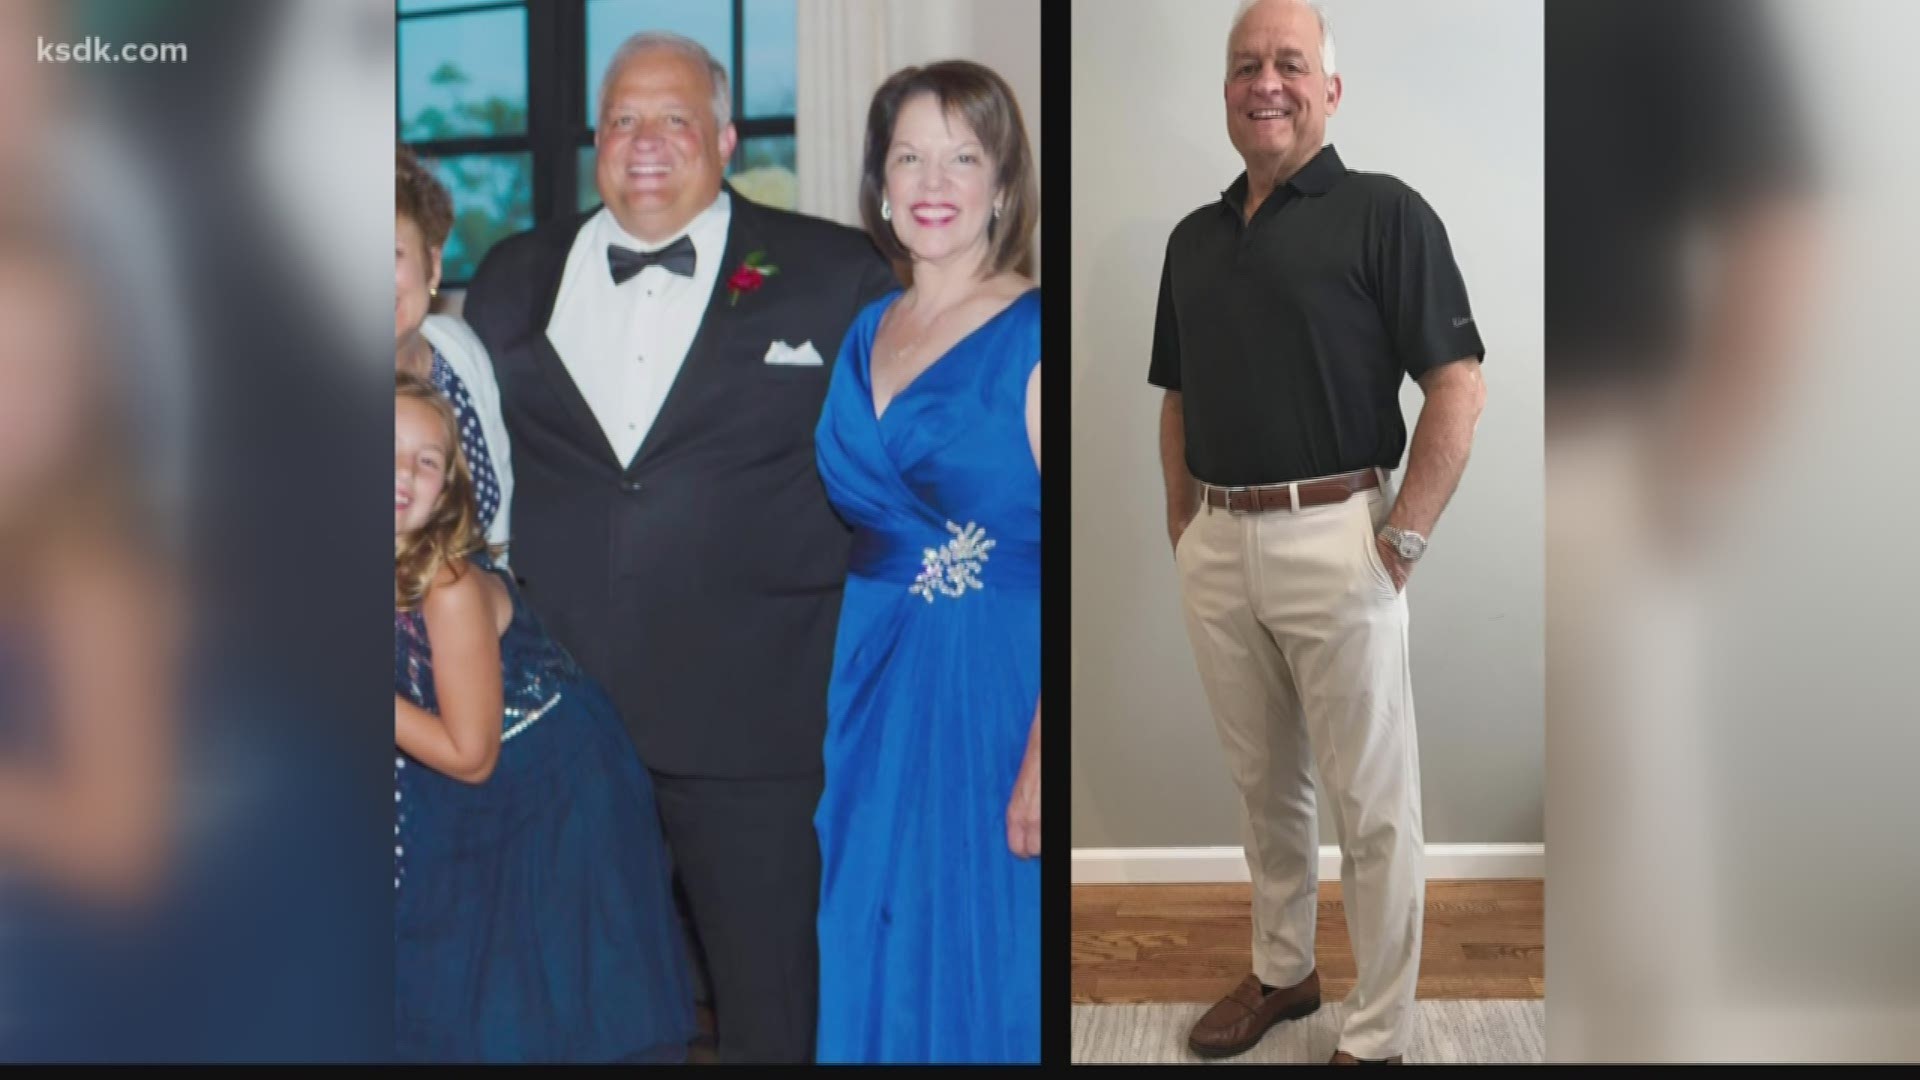 John Dietl lost 90 pounds working with Charles D’Angelo.